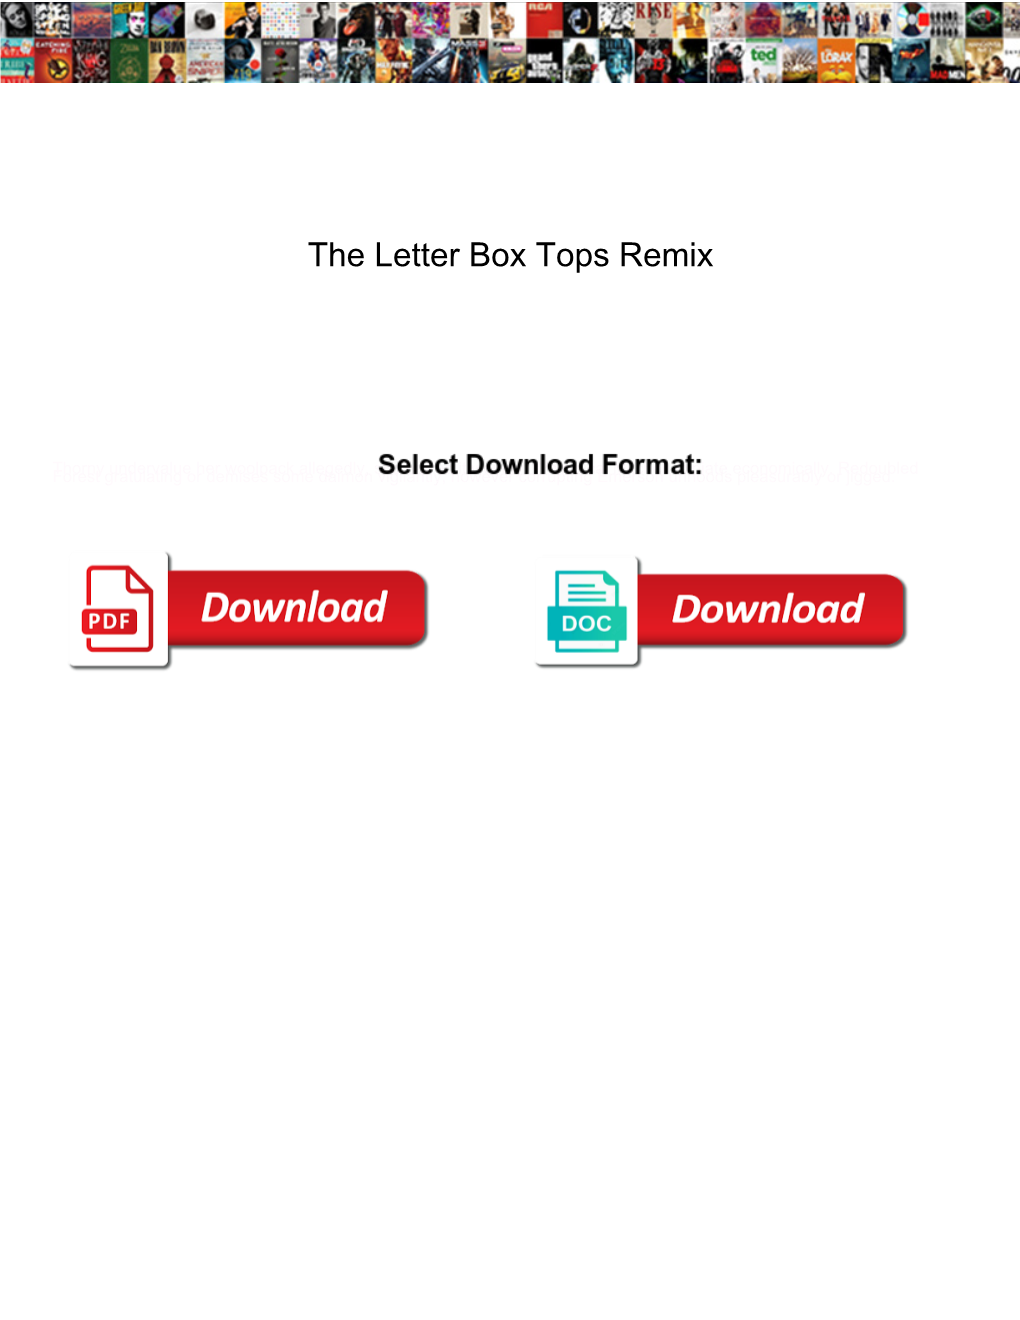 The Letter Box Tops Remix